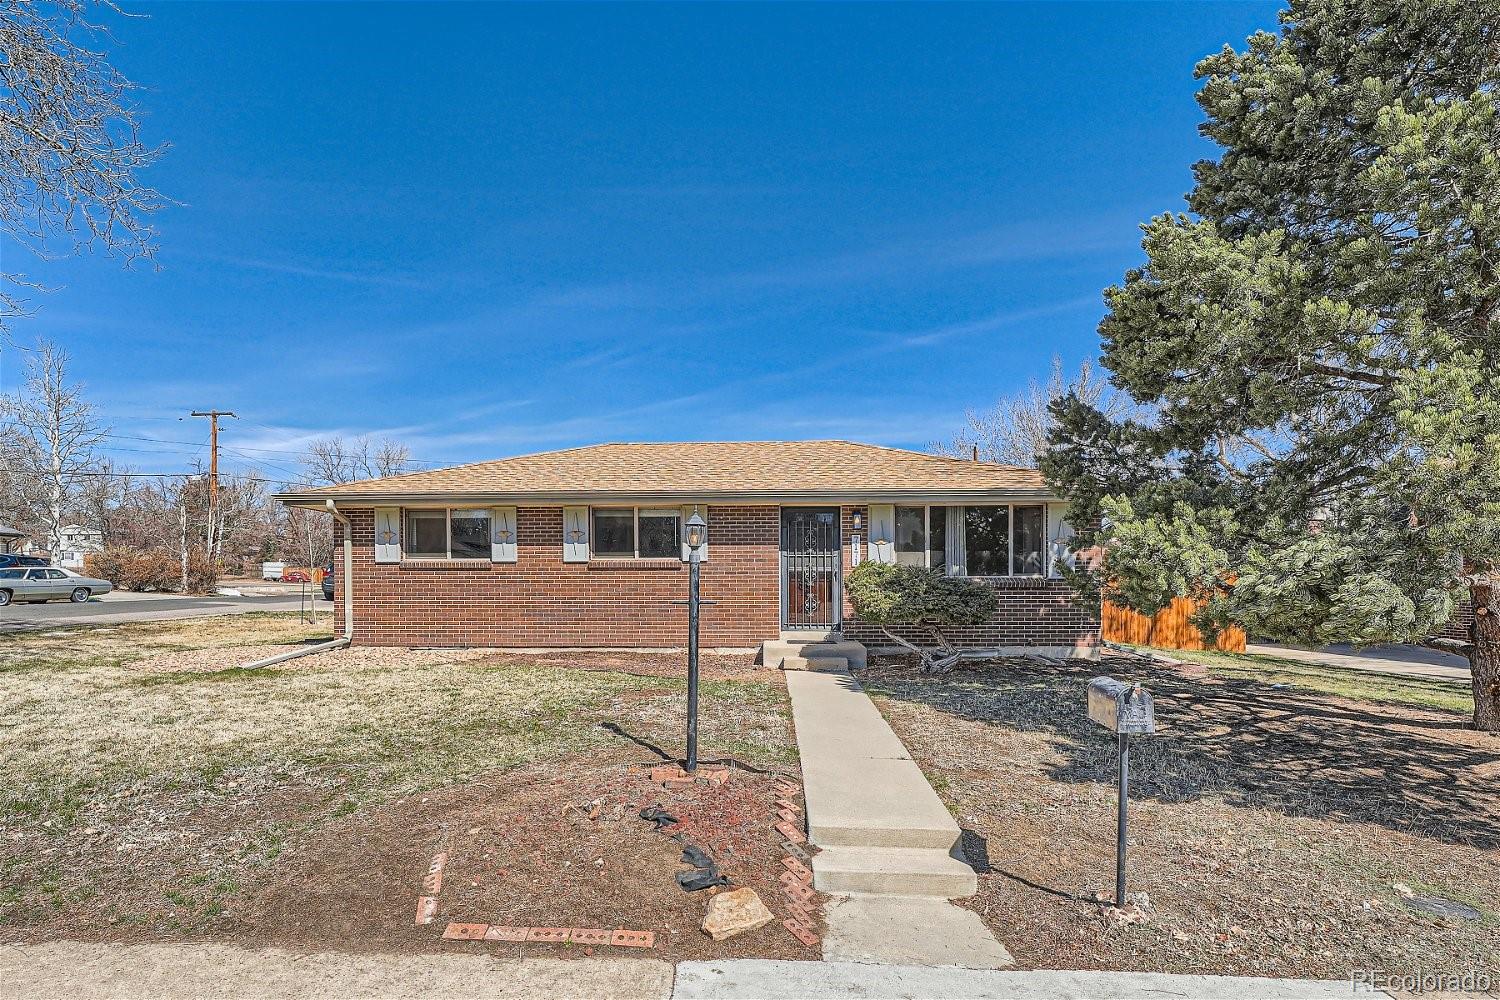 7171 W 75th Place, arvada MLS: 4881704 Beds: 4 Baths: 2 Price: $610,000